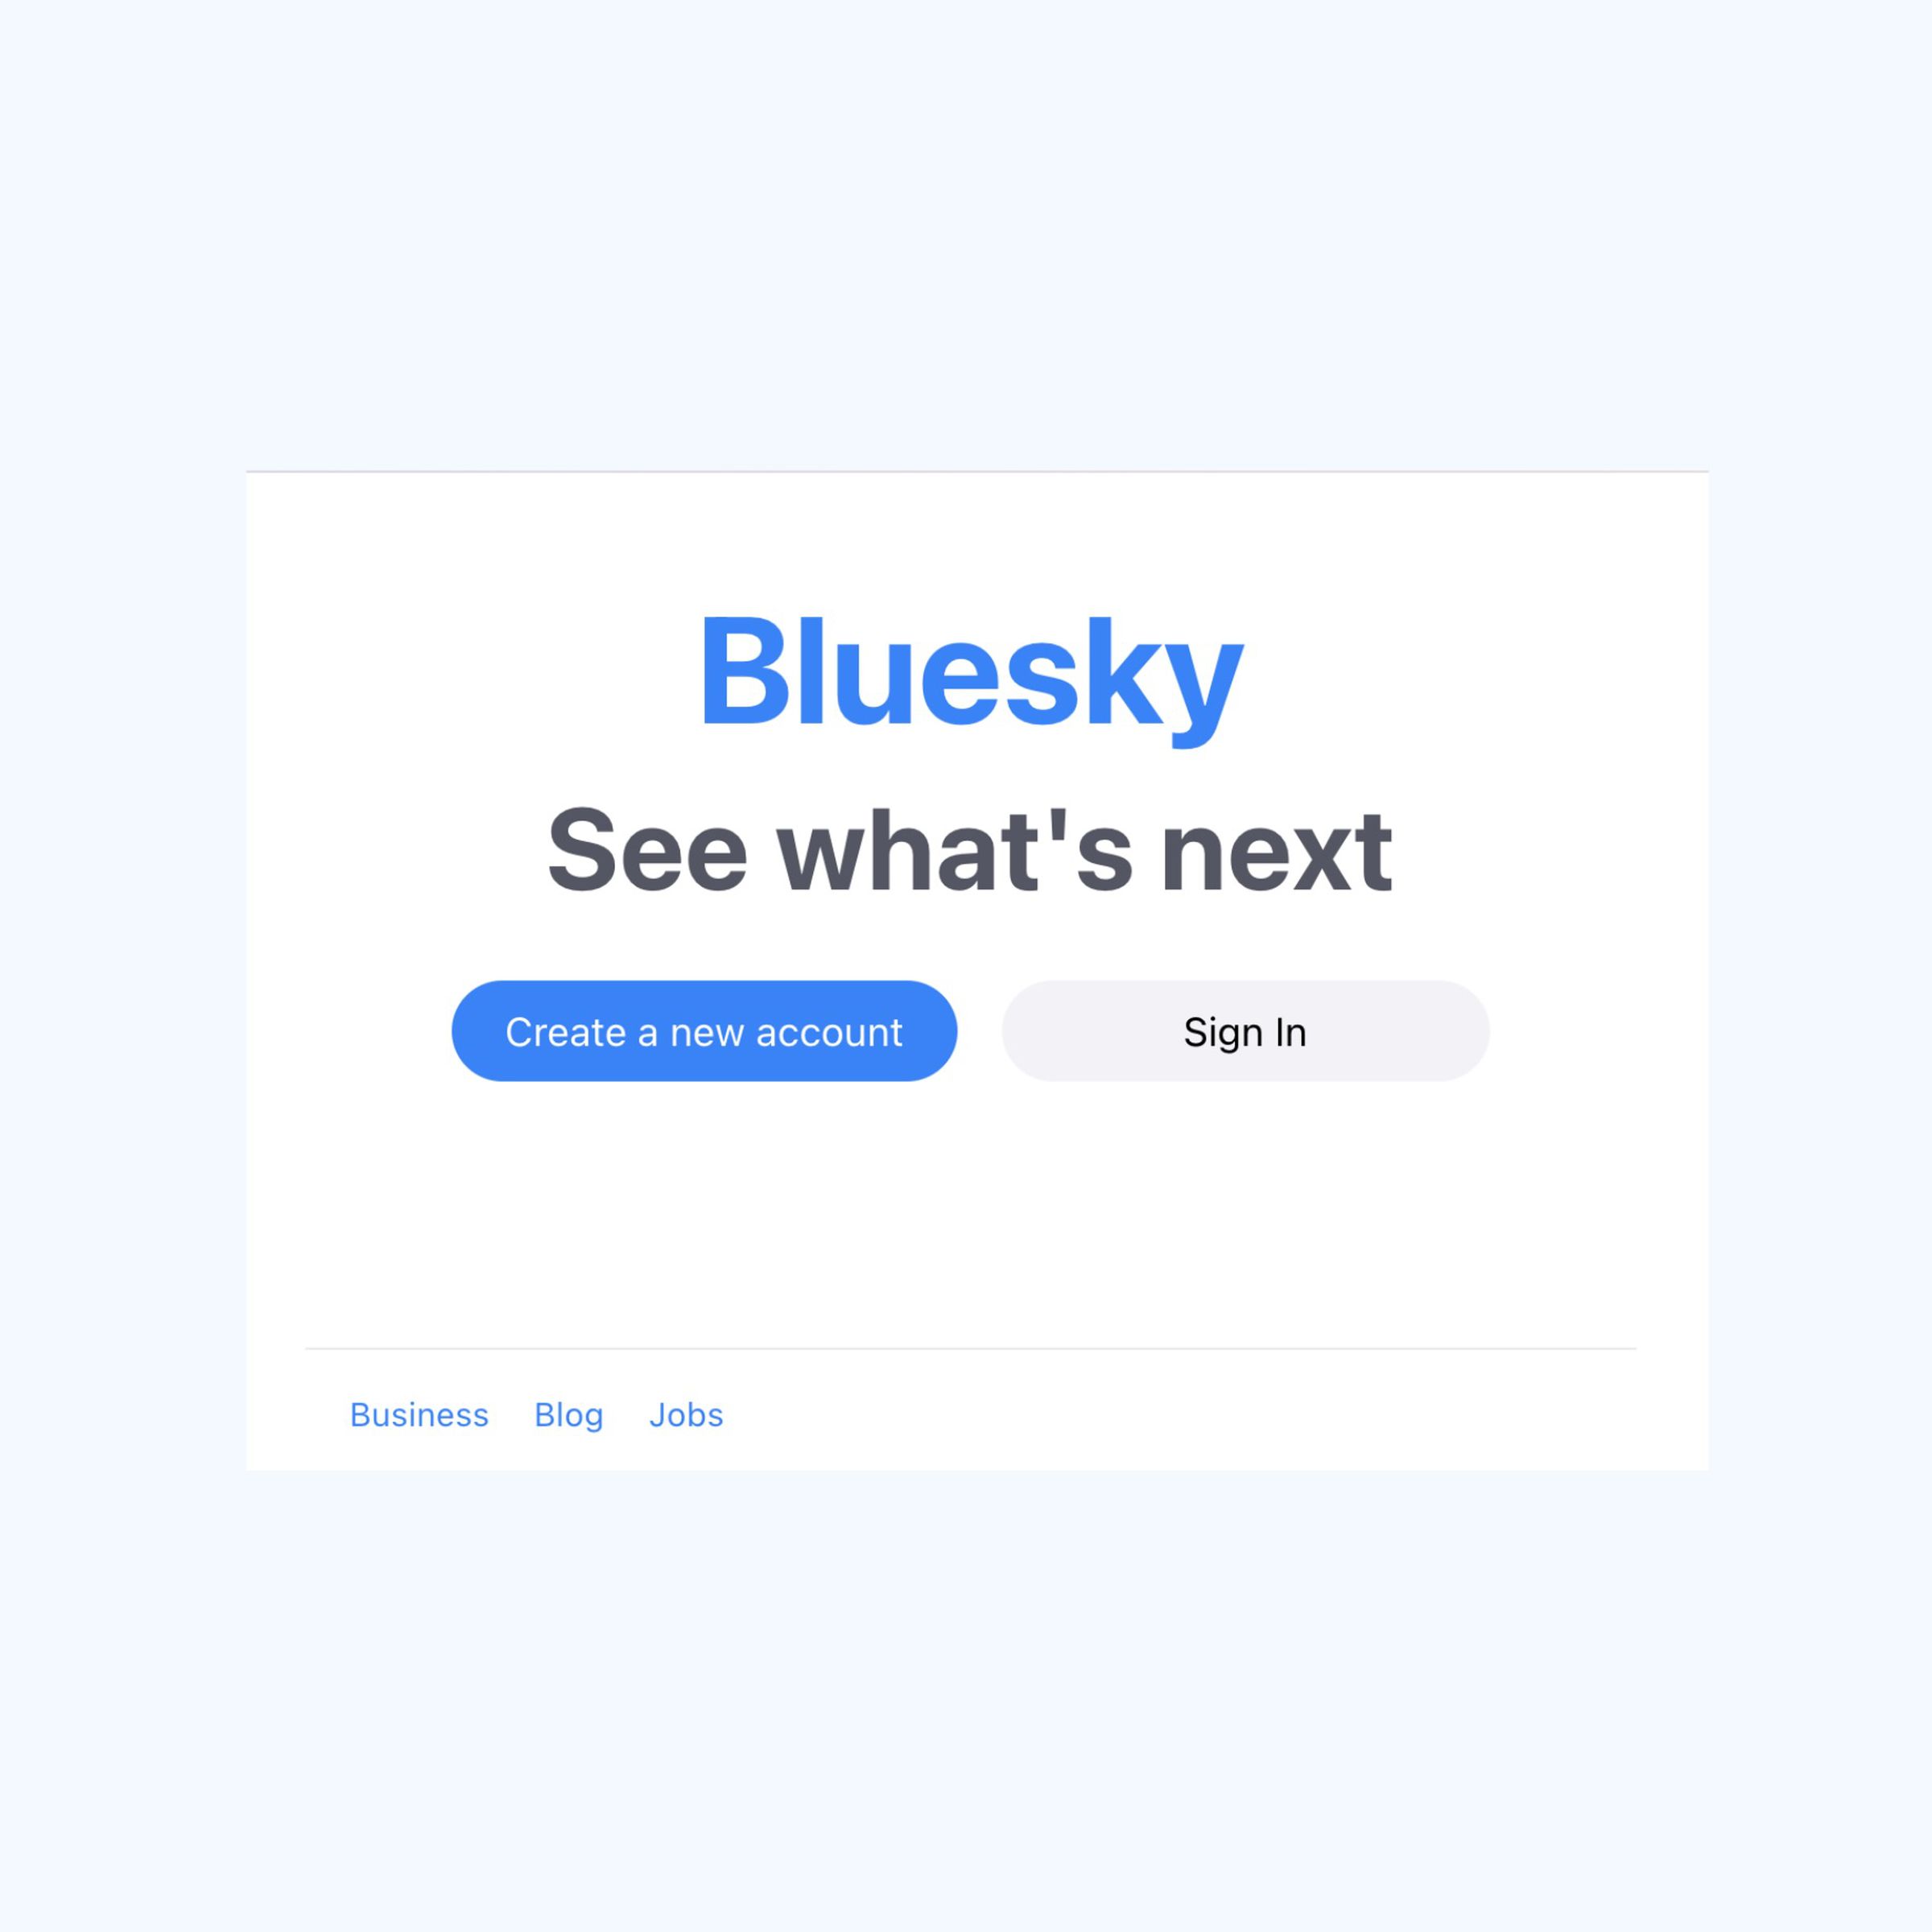 “blue sky, see what’s next” with button for create new account and button for sign-in, and category links for business, blog, and jobs.